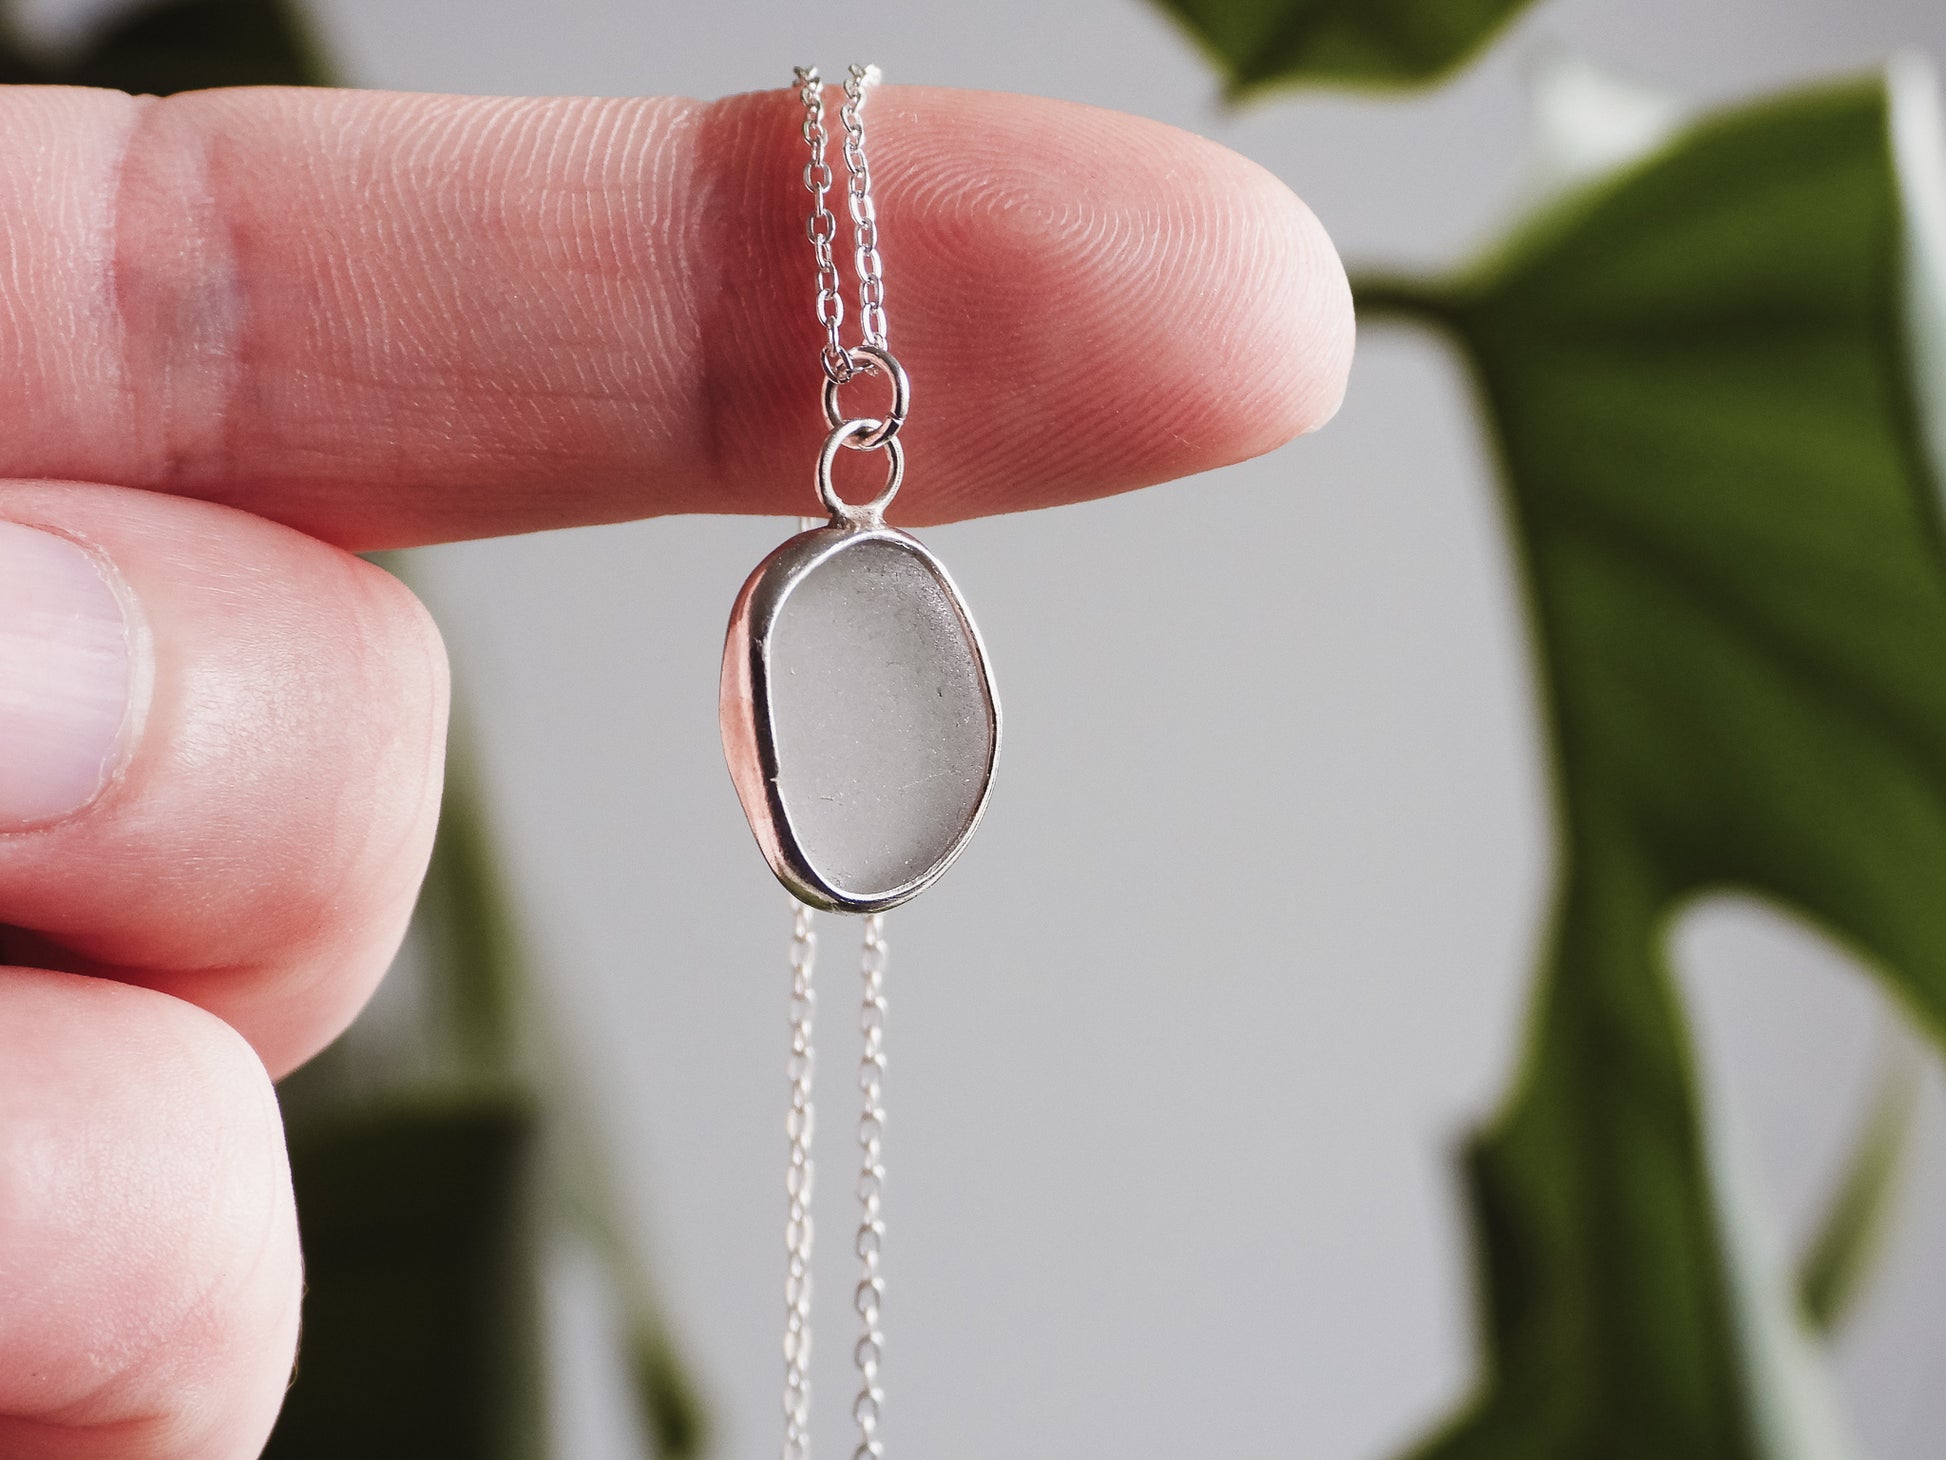 dainty cornish seaglass necklace with rare grey ocean glass